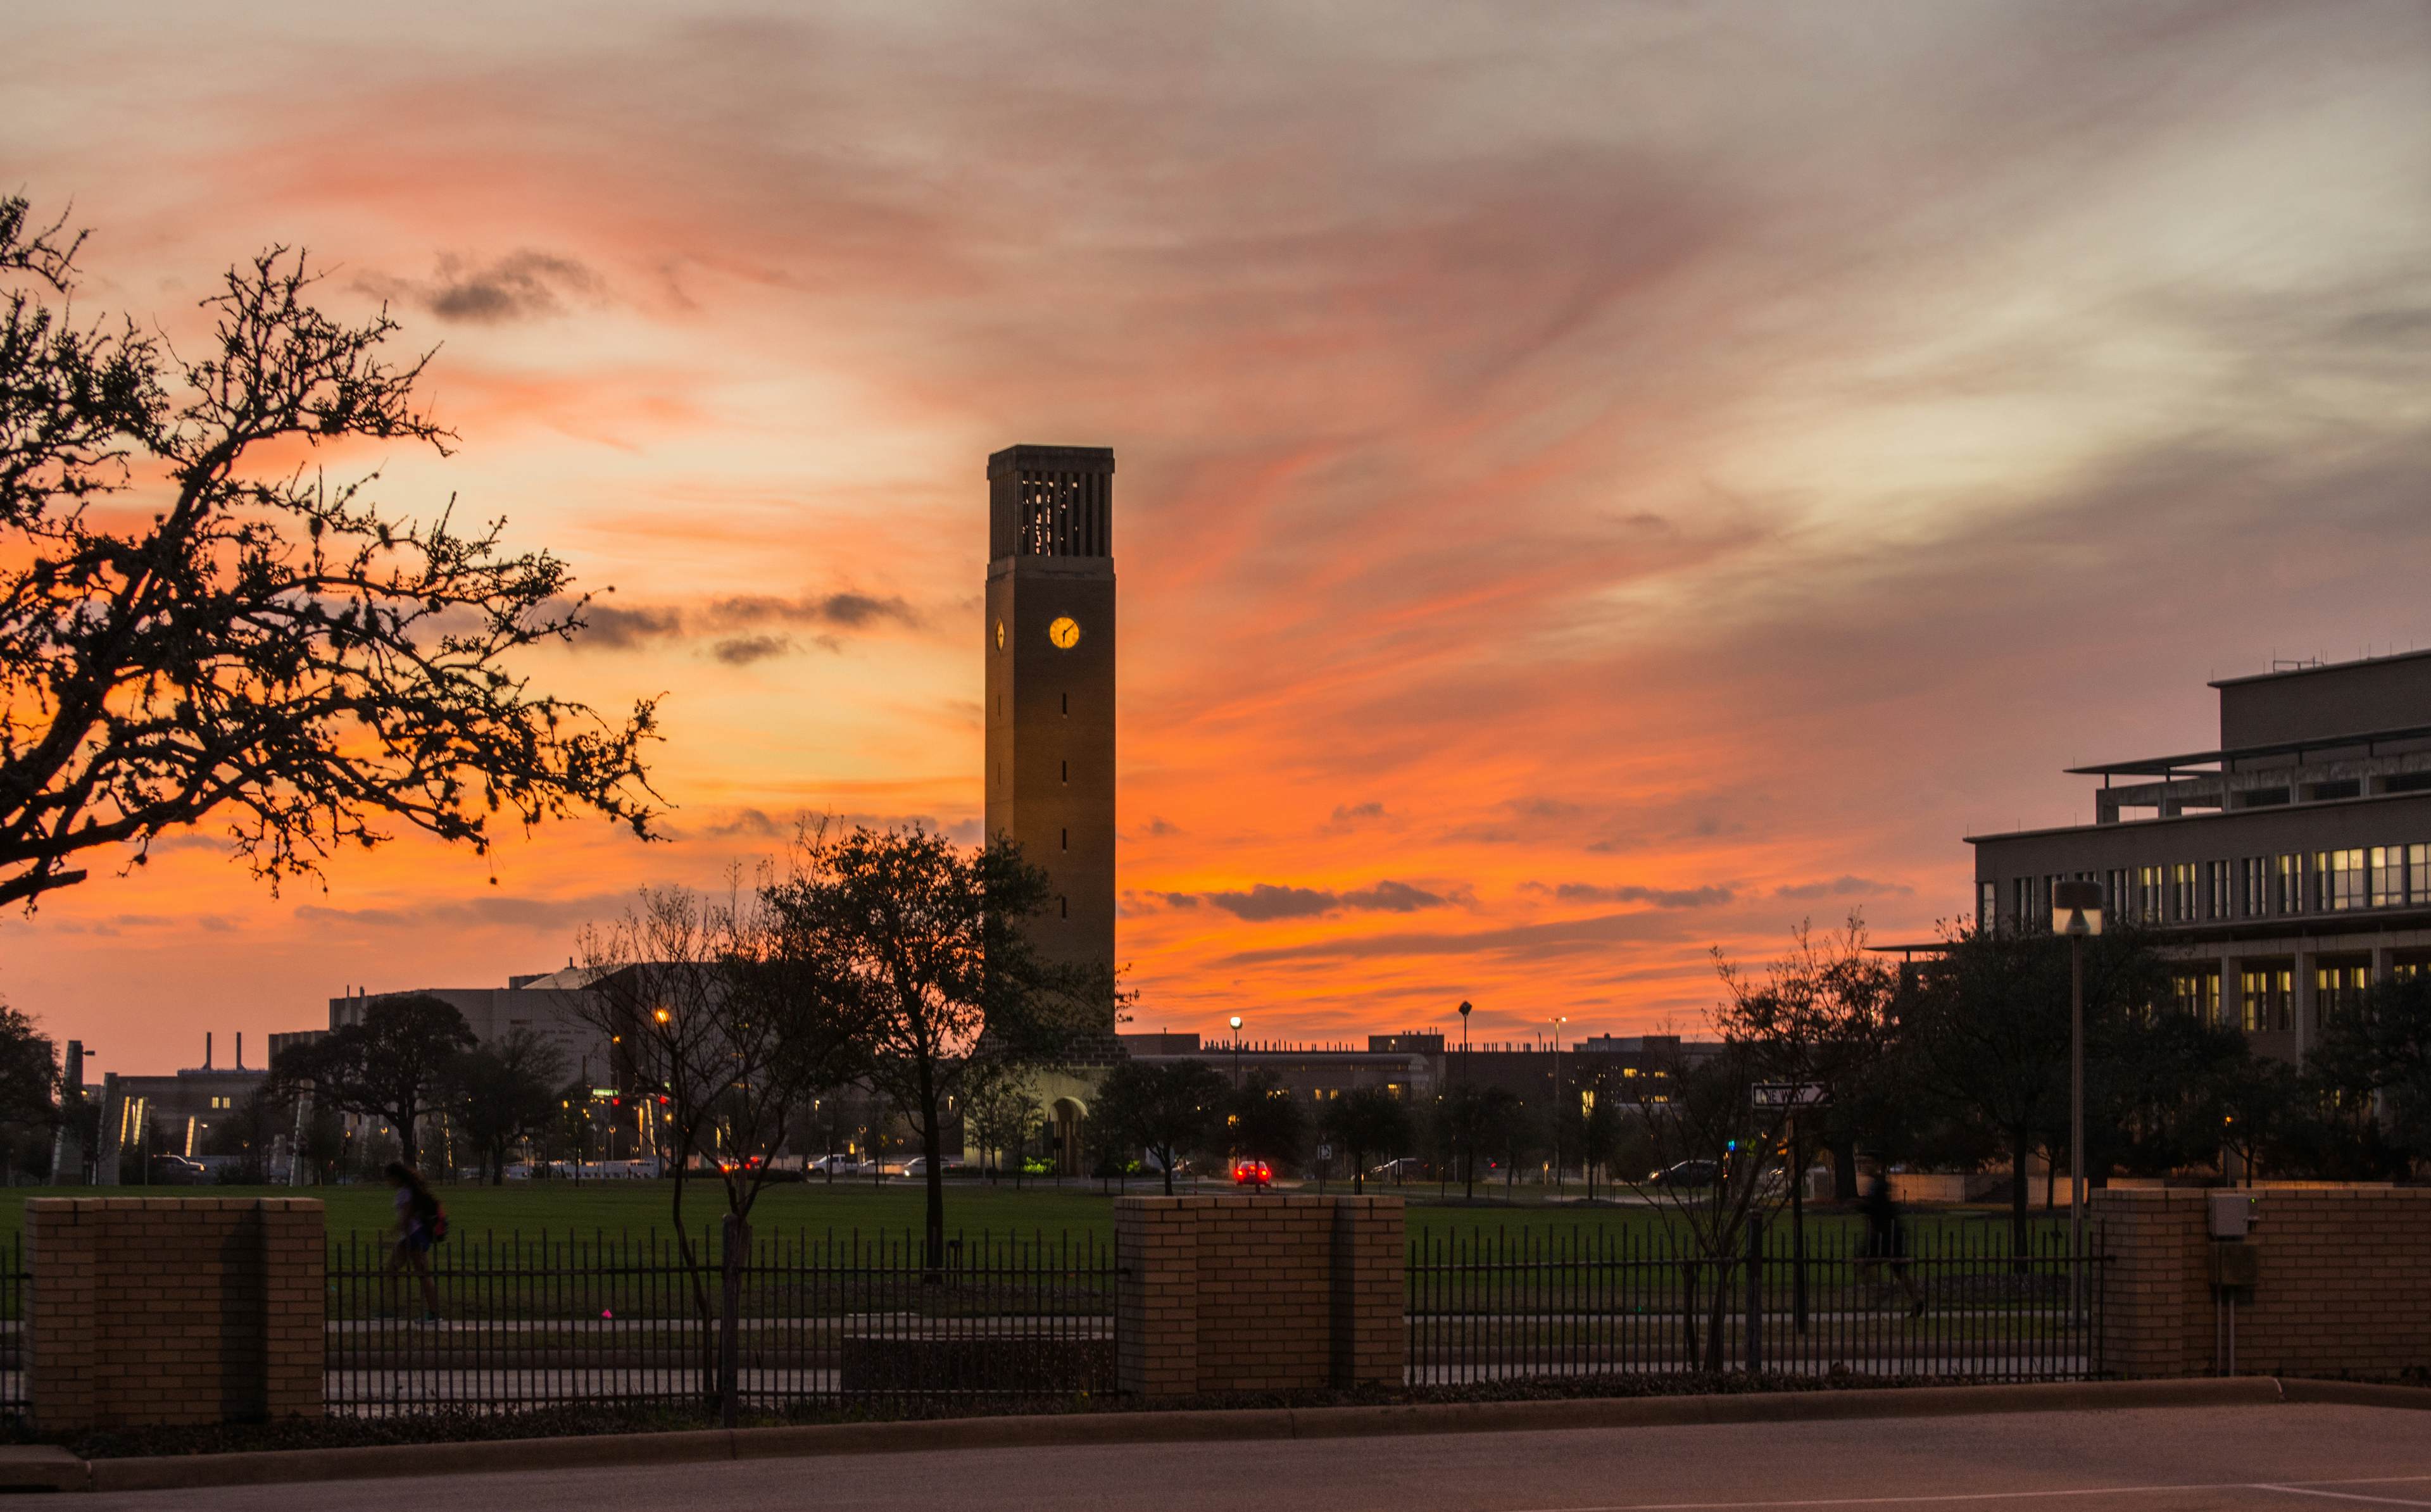 Sunset on Texas A&M campus